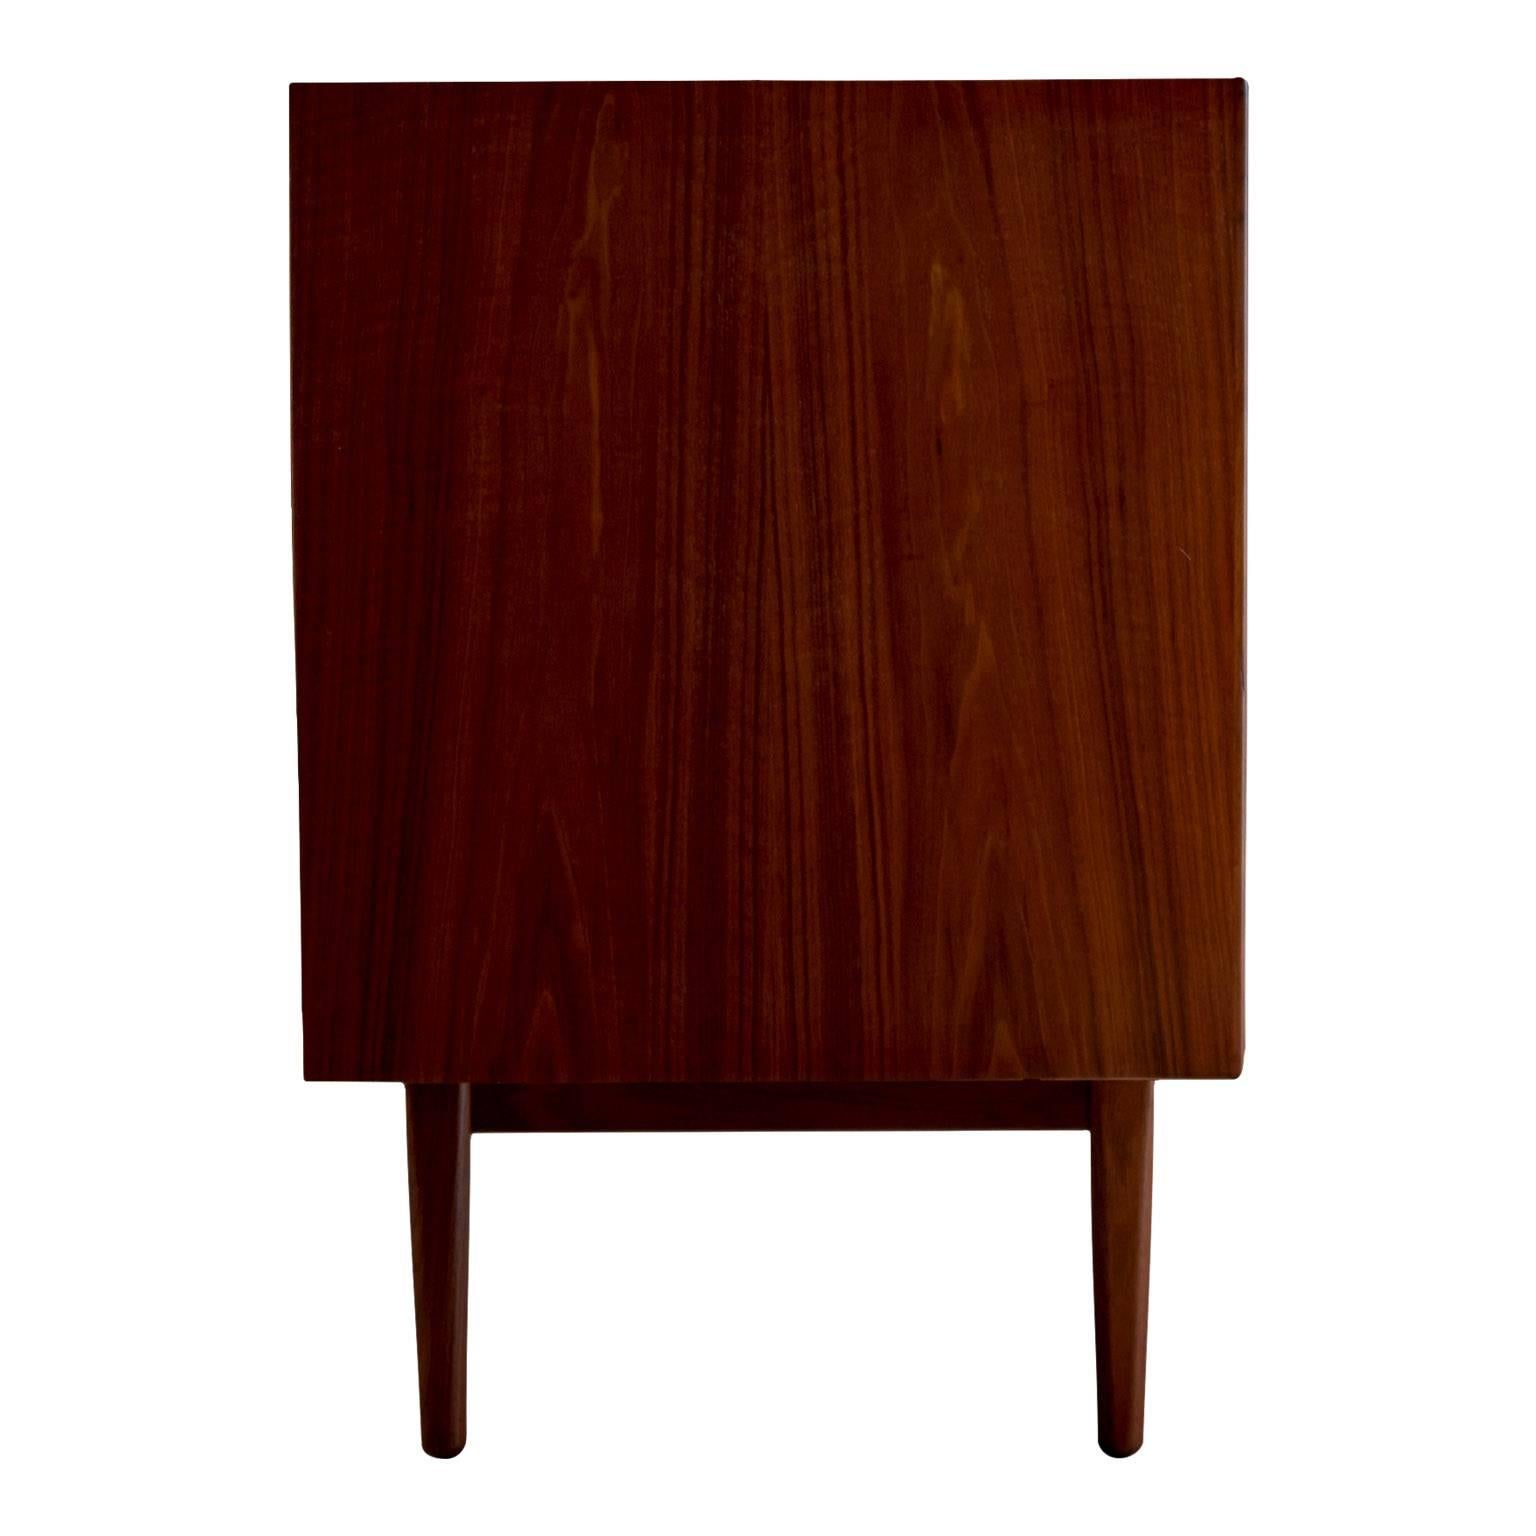 Exceptional Mid-Century Modern credenza designed by Kipp Stewart and Stewart McDougall as part of the Declaration line for Drexel furniture. Fabricated from veneered walnut with striking wood grain and dovetail drawers this beautiful credenza has